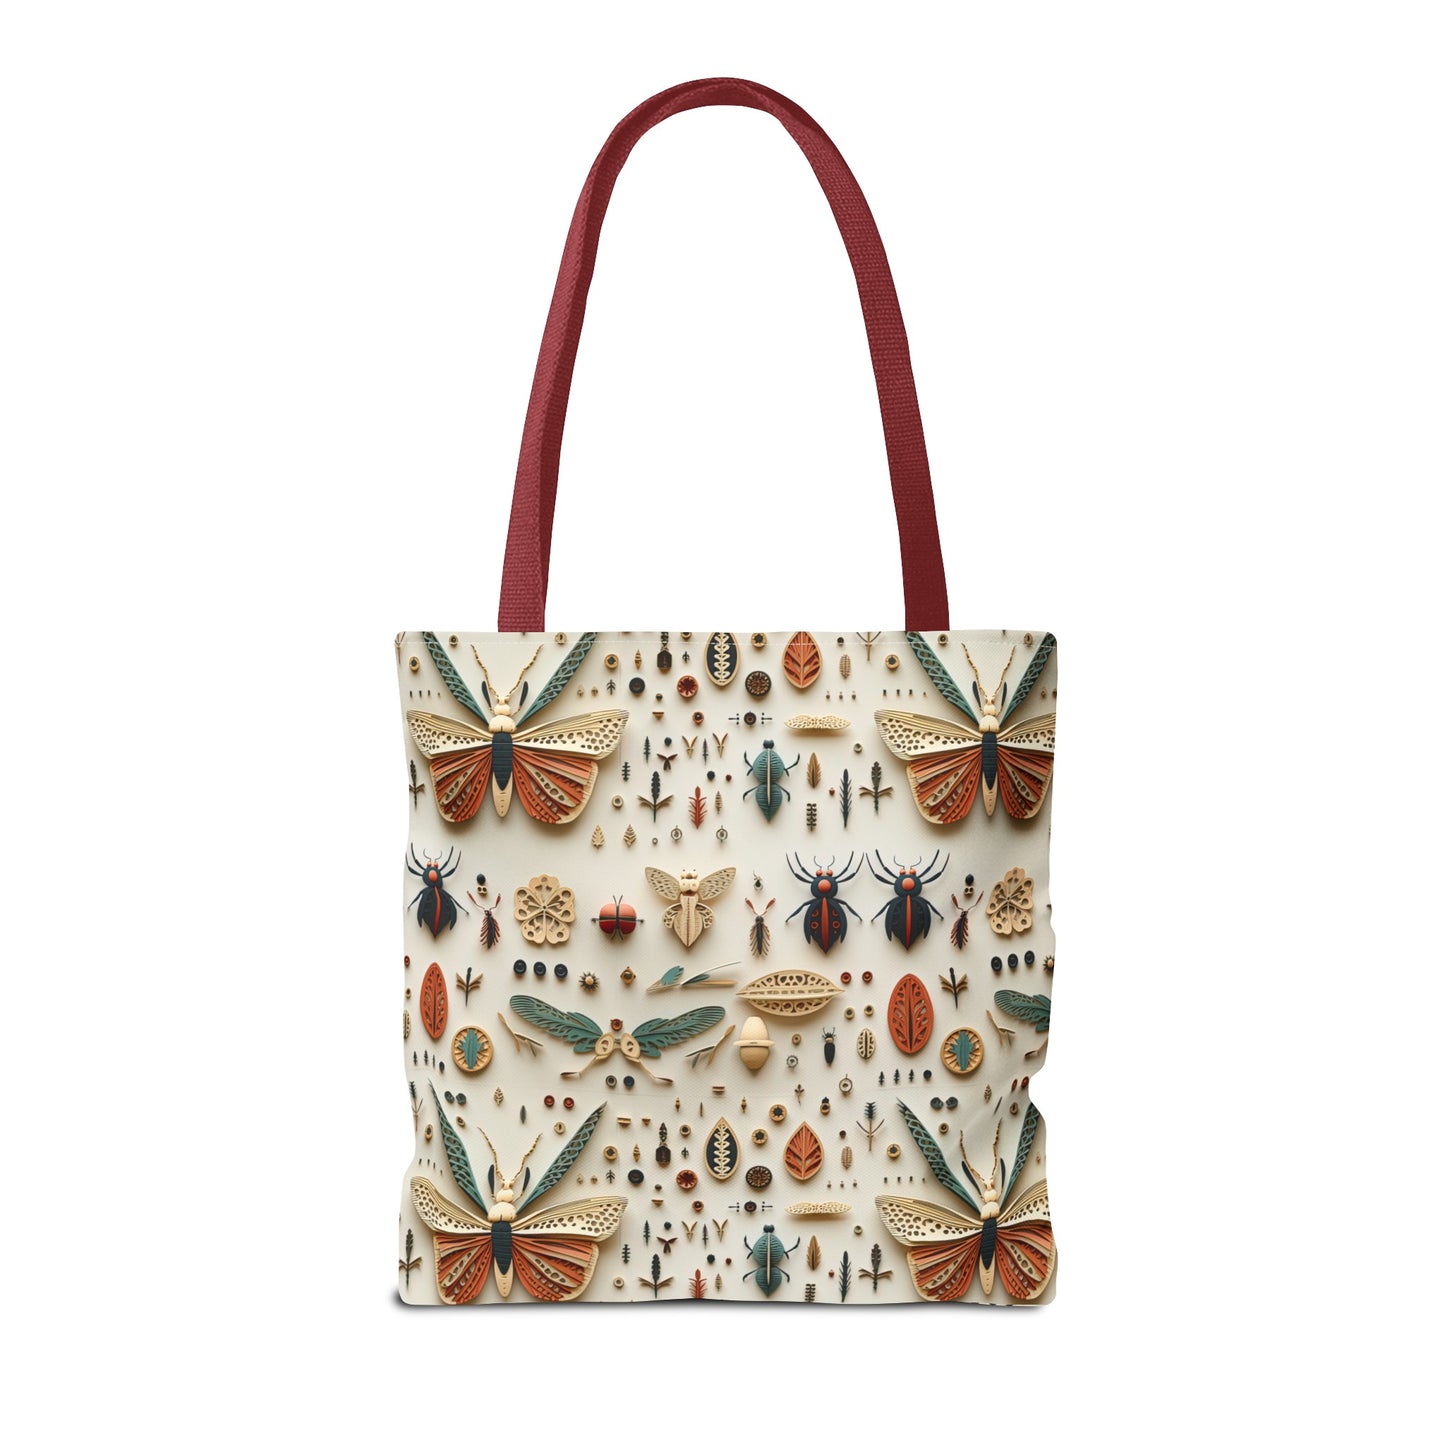 Bugs and kisses Tote Bag